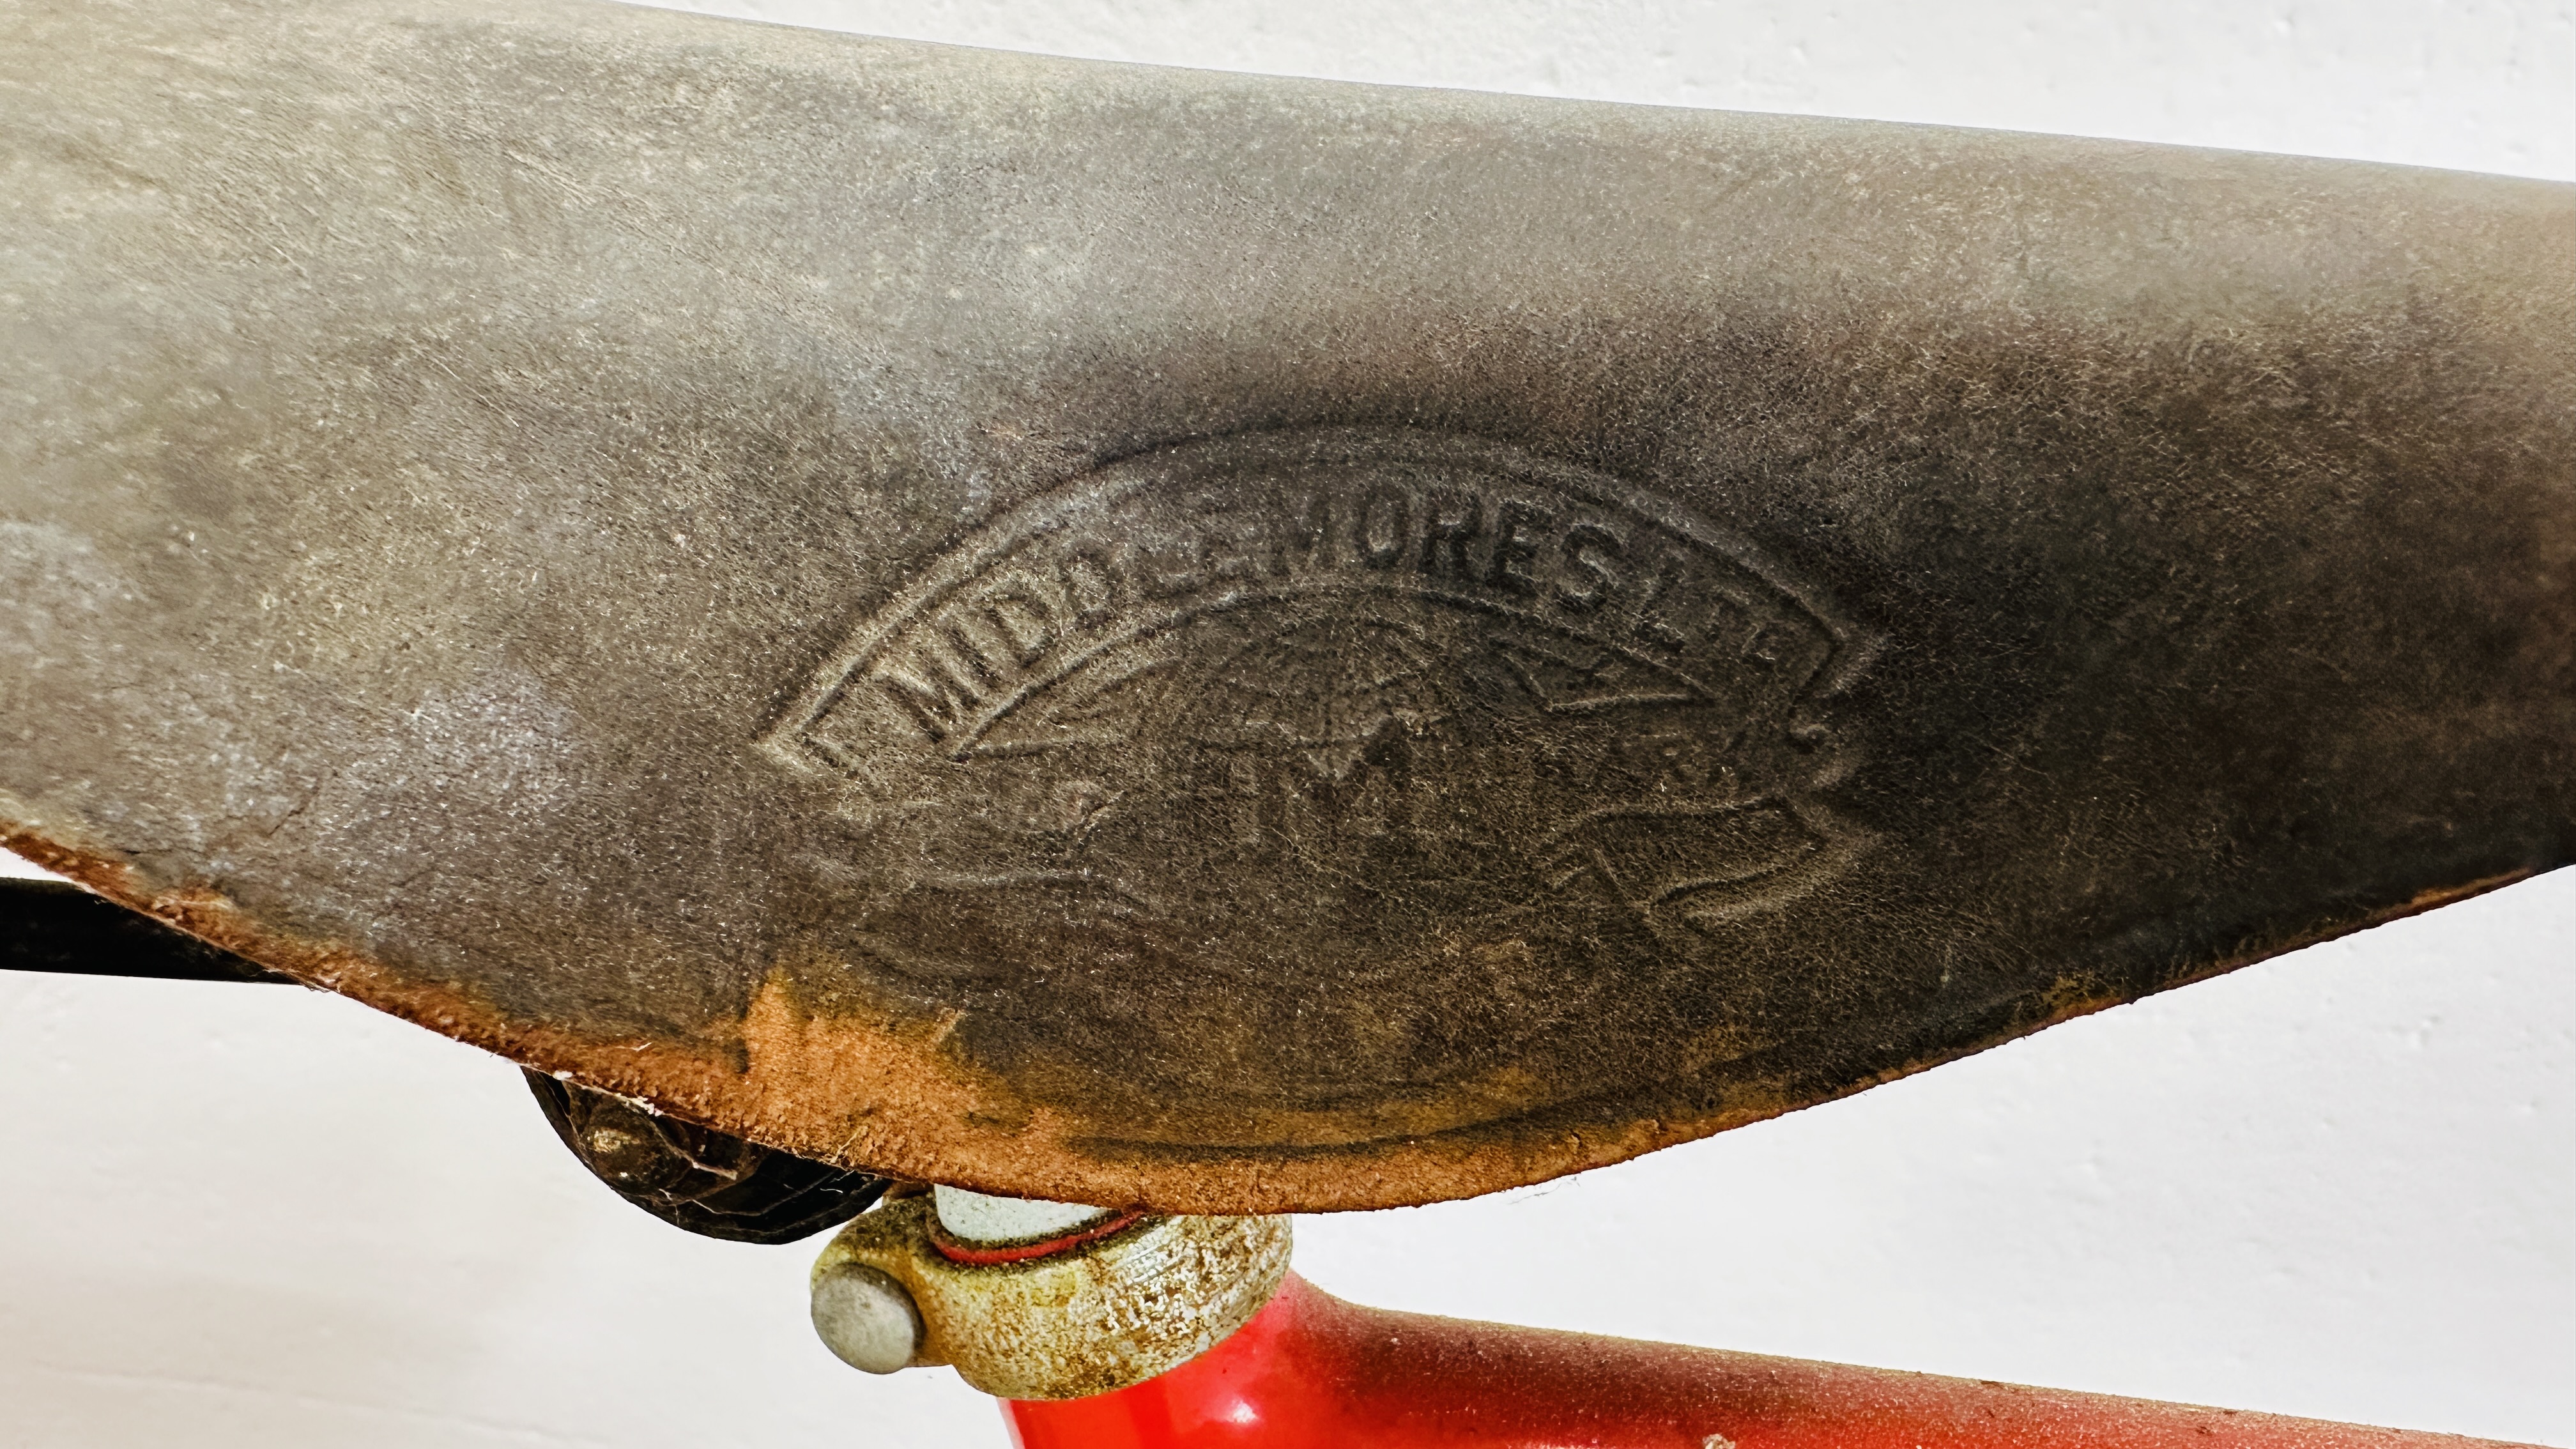 1948 OLYMPIC CLAUD BUTLER SINGLE SPEED RACING BIKE FITTED WITH A MIDDLE MORES LTD LEATHER SADDLE. - Image 12 of 14